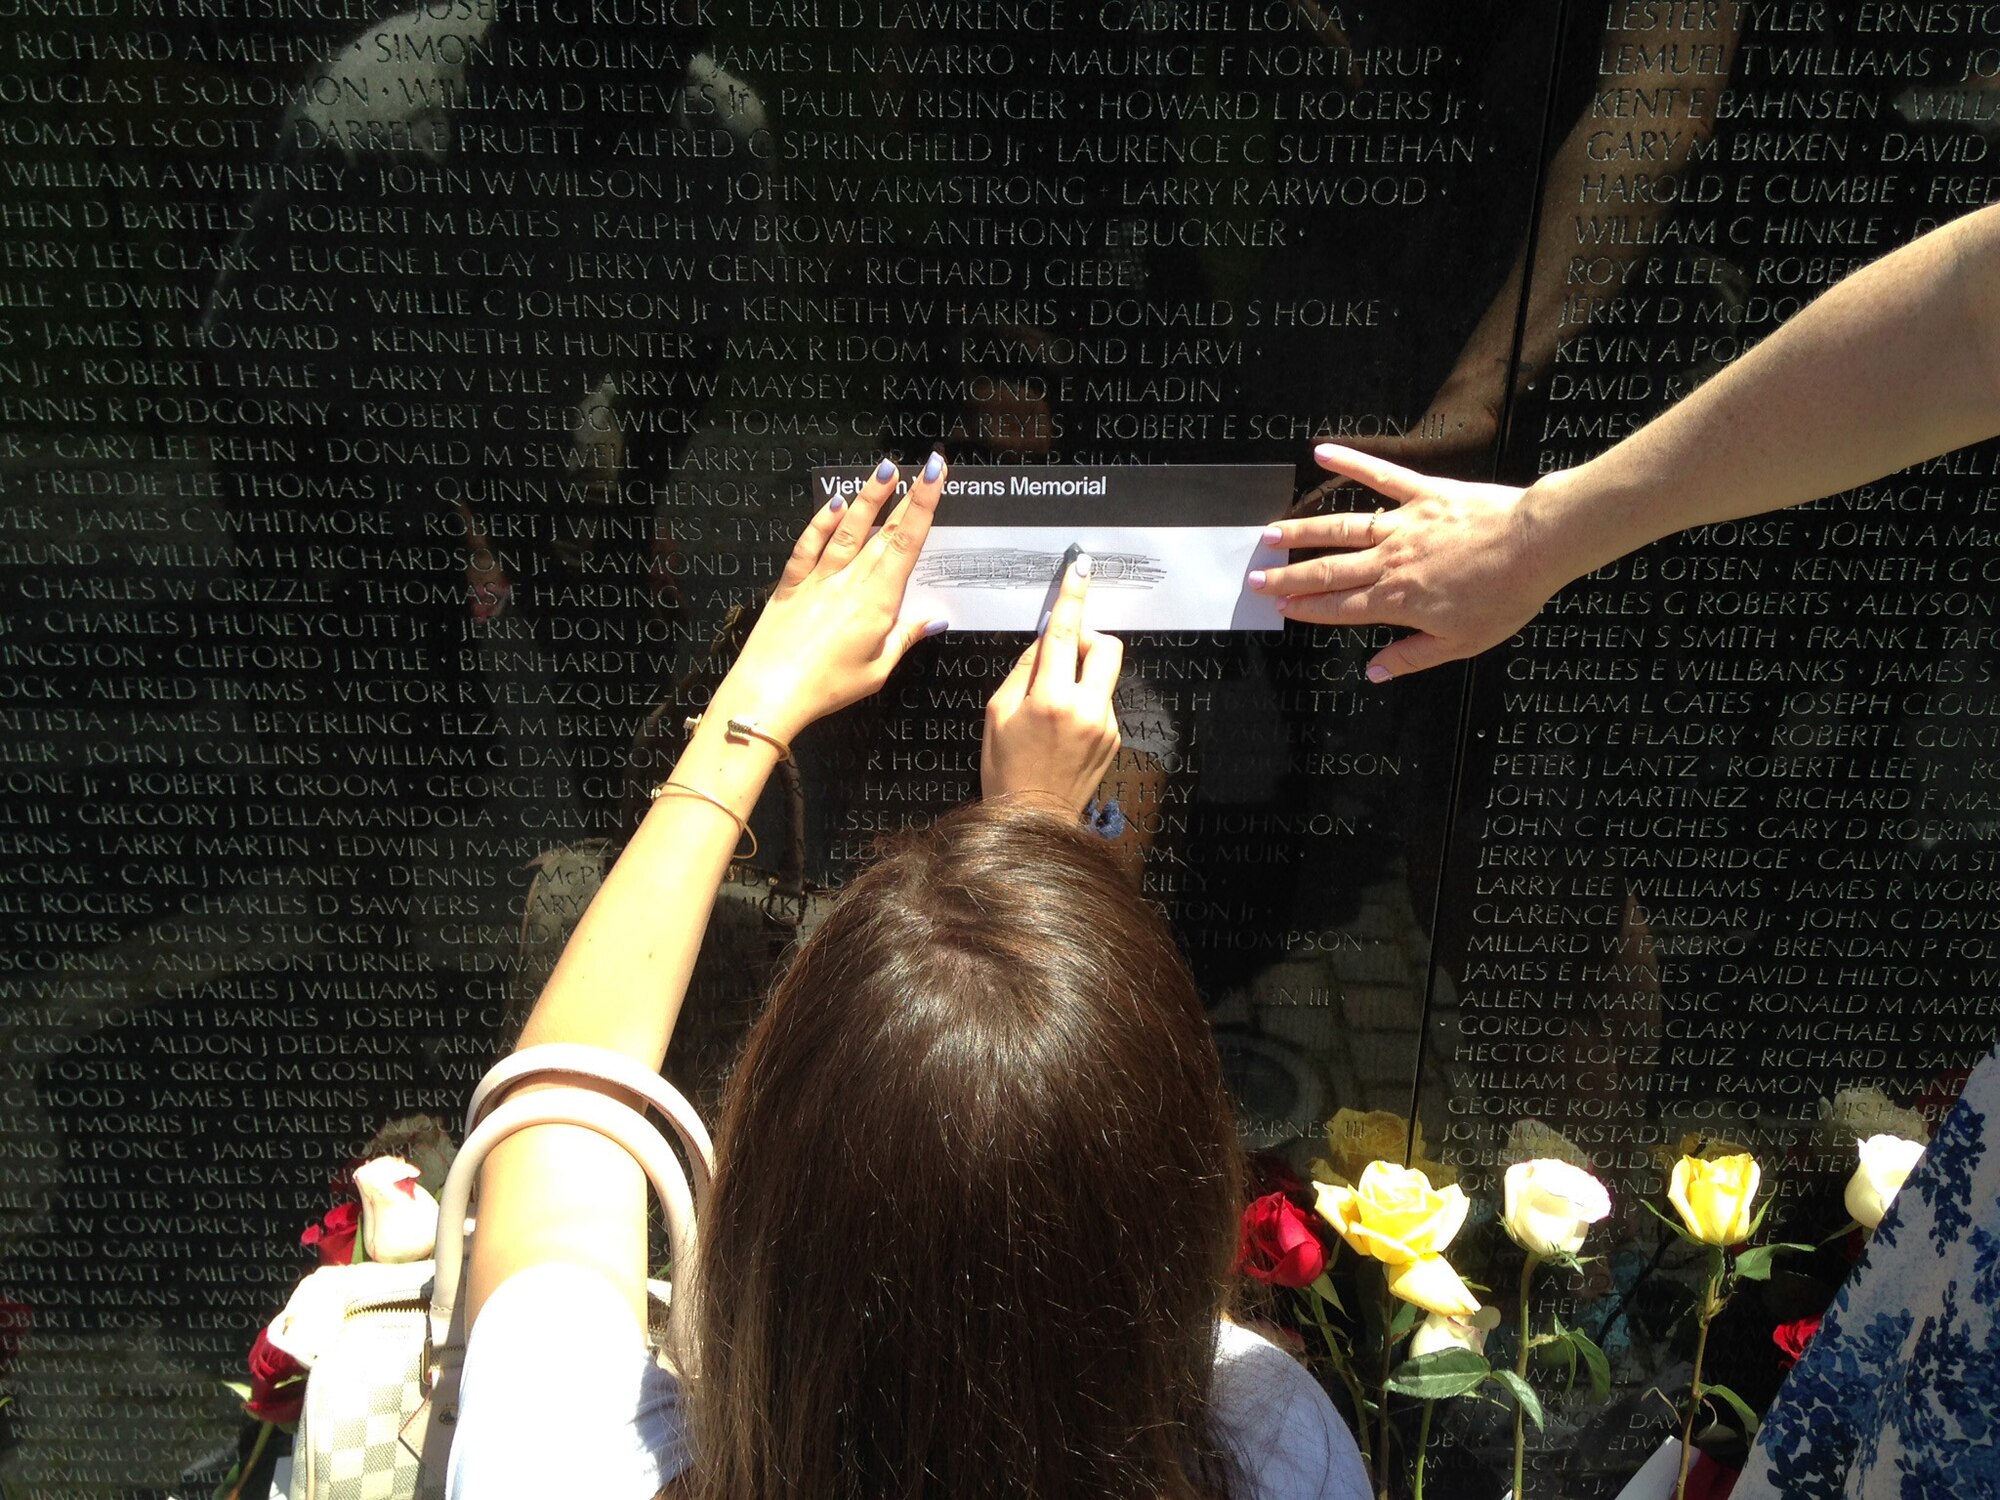 On Father’s Day June 15, 2014, Caroline Kozak, the daughter of Maureen and Col. Raymond A. Kozak, 512th Airlift Wing commander at Dover Air Force Base, Del., rubs a pencil across her grandfather’s name on the Vietnam Veterans Memorial, Washington, D.C. Her grandfather was an Air Force fighter pilot, who was shot down over North Vietnam in 1967 and was listed as missing in action until 1976, when he was declared killed in action, body not recovered. (Submitted photo)